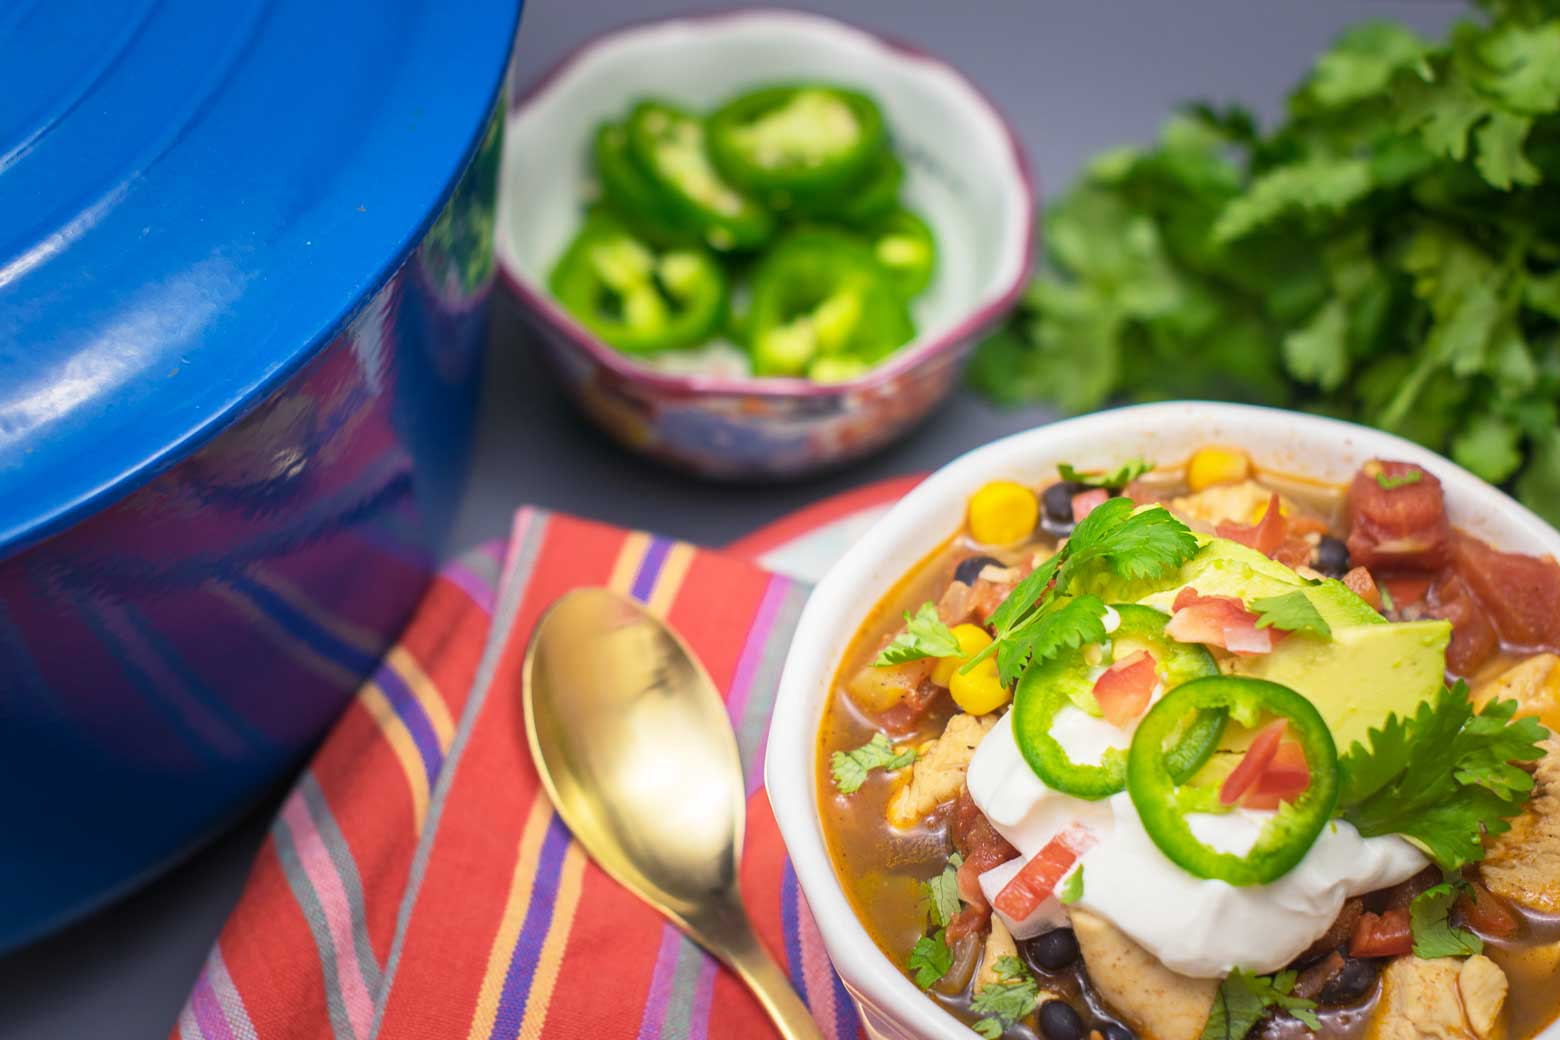 Using canned veggies saves time with this chicken chili!